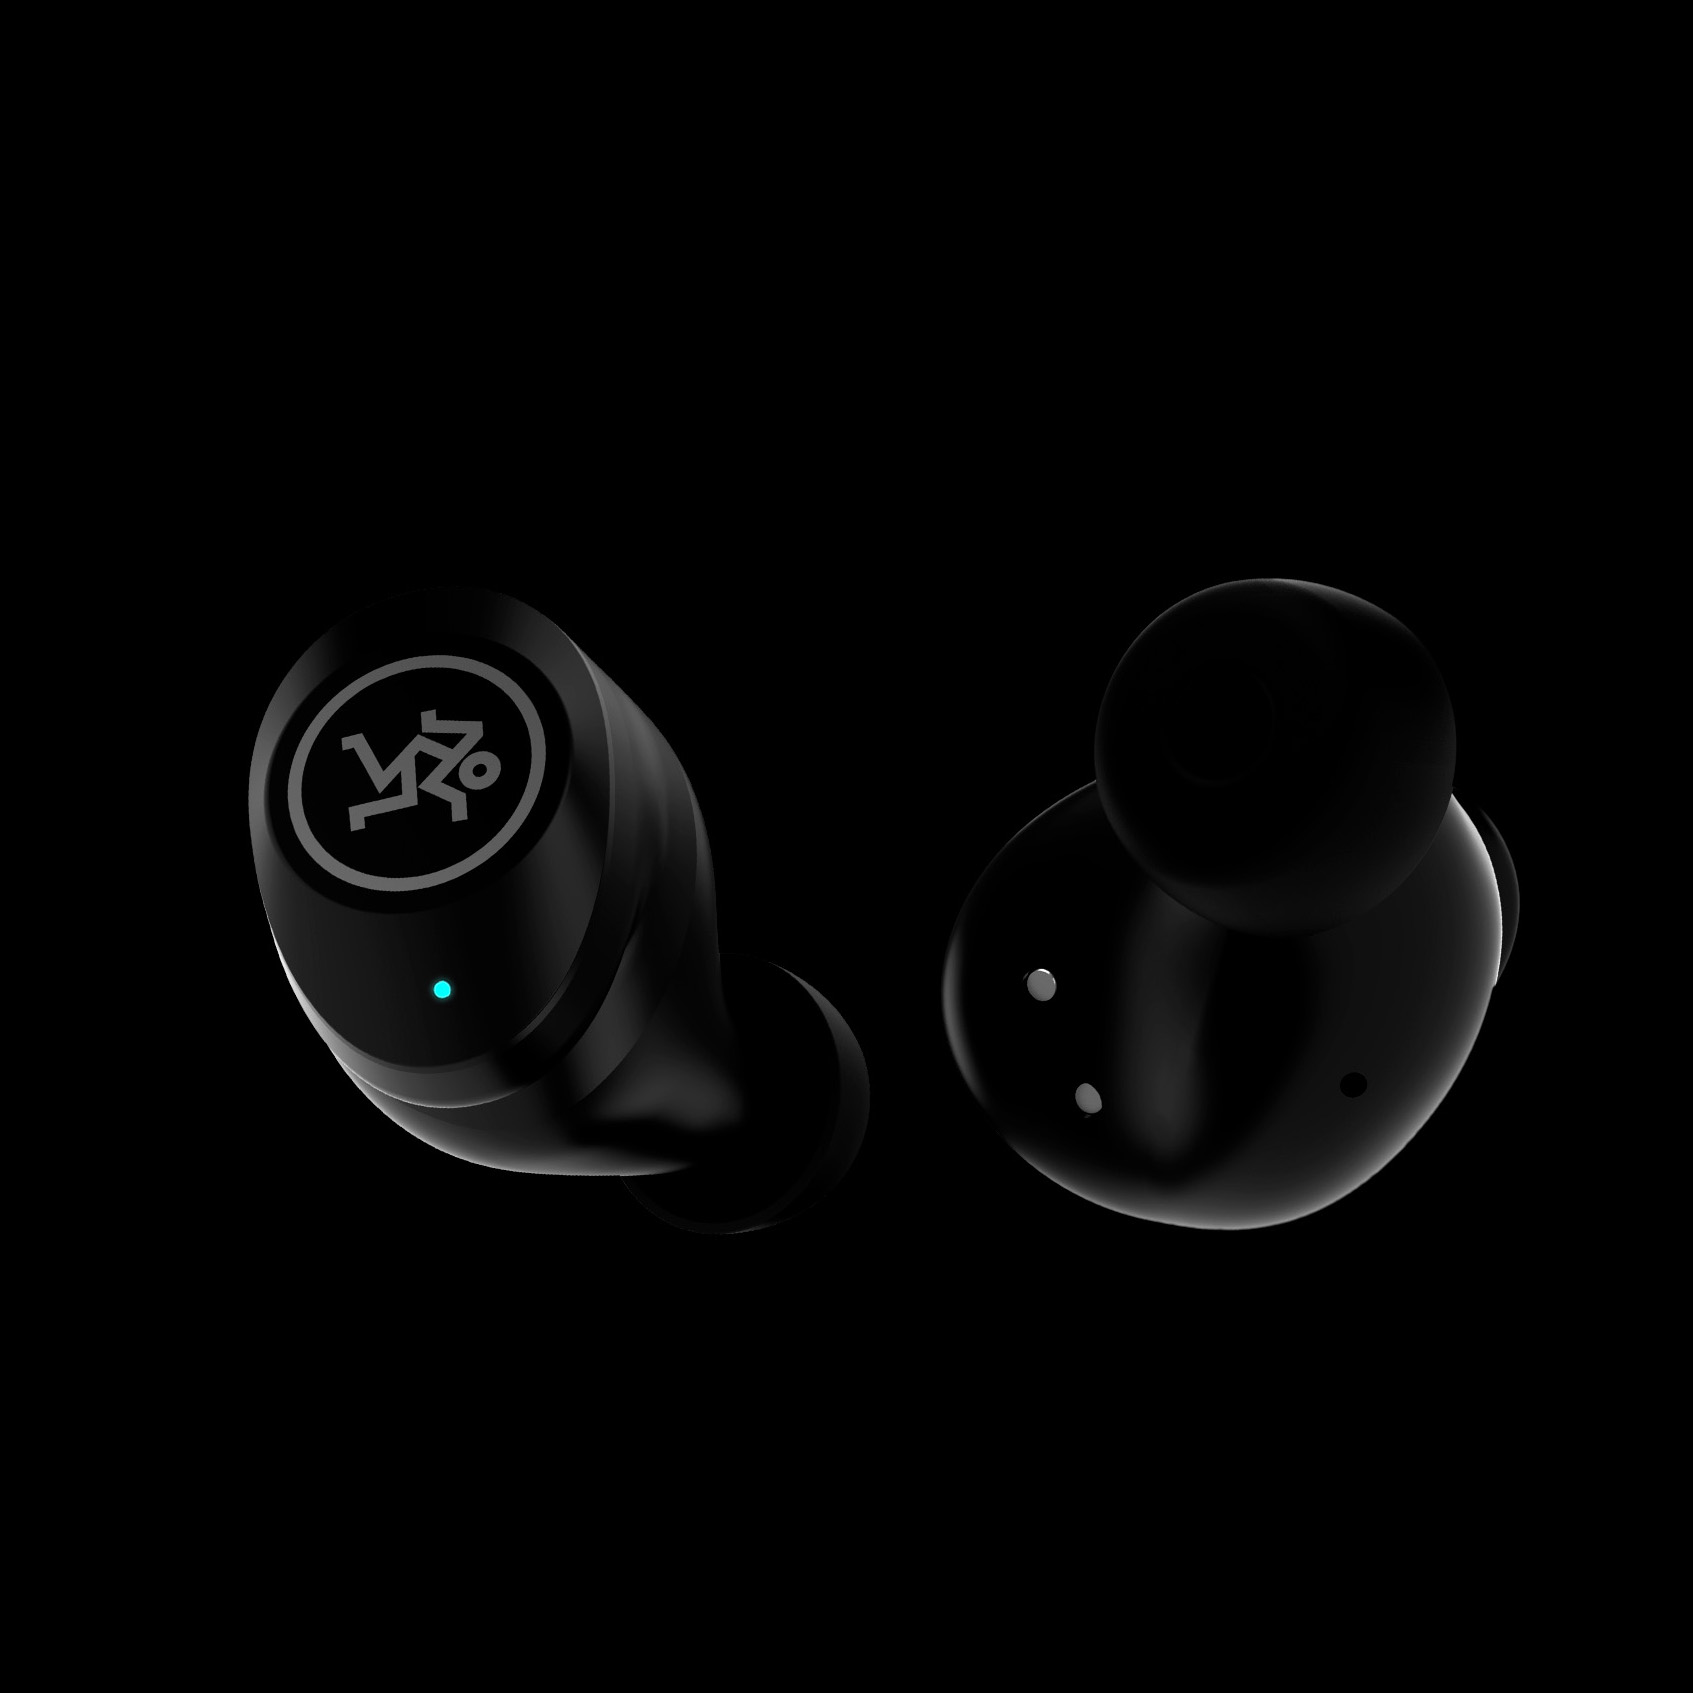 MP-20TWS True Wireless Dual-Driver Earbuds with Active Noise